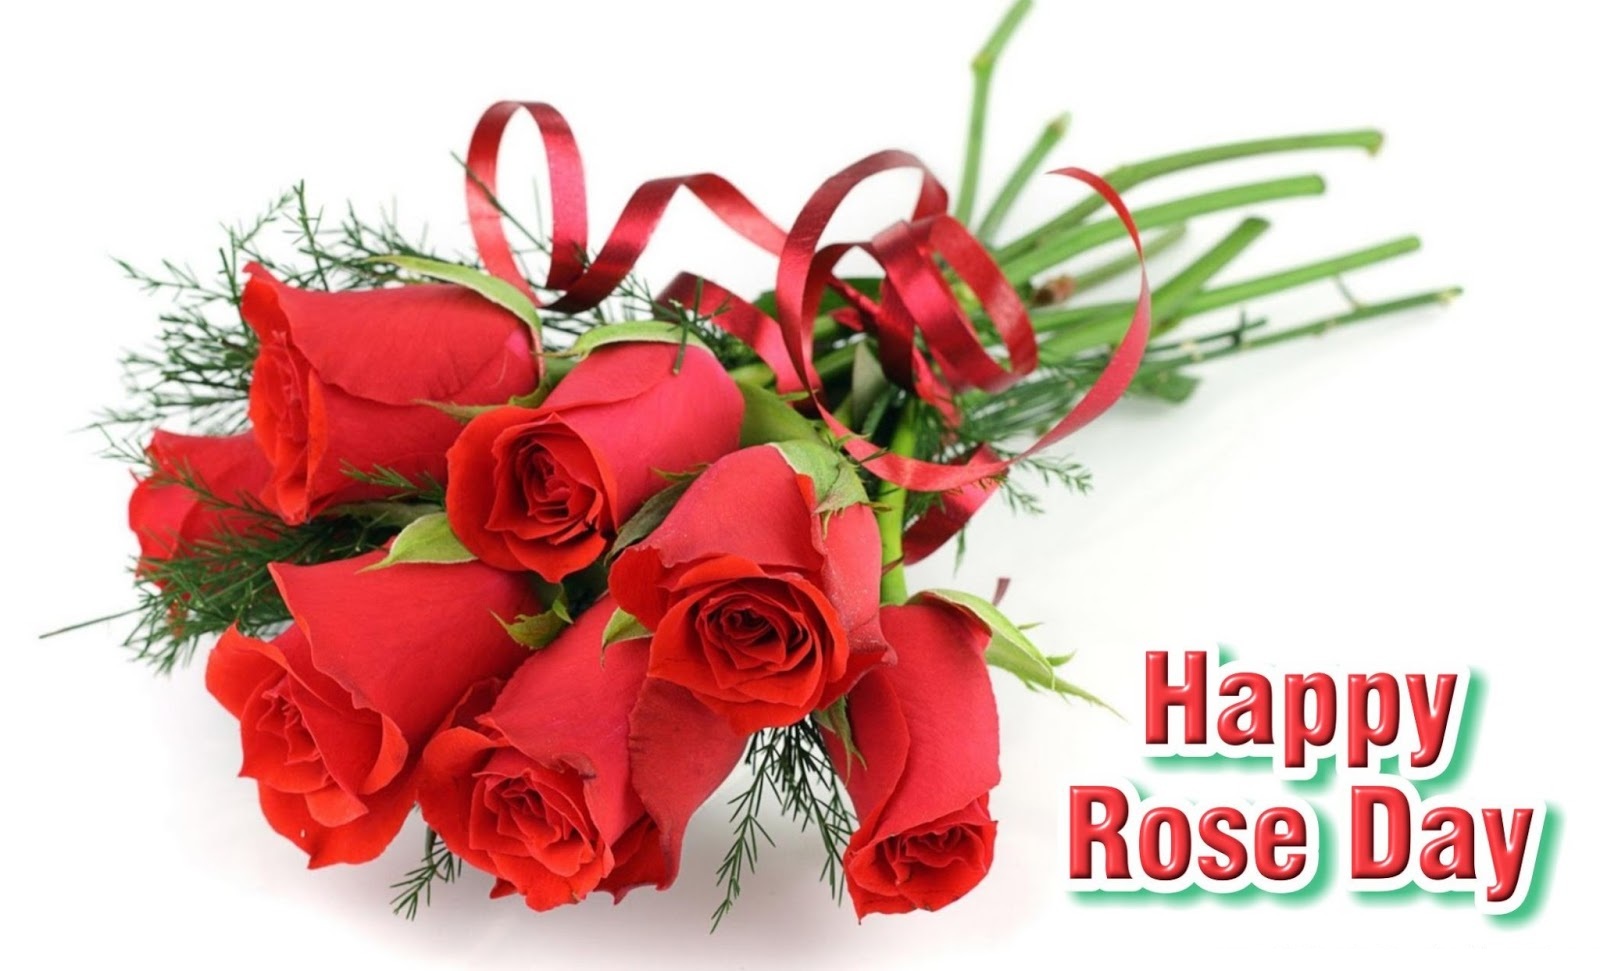 Rose day wallpapers free download